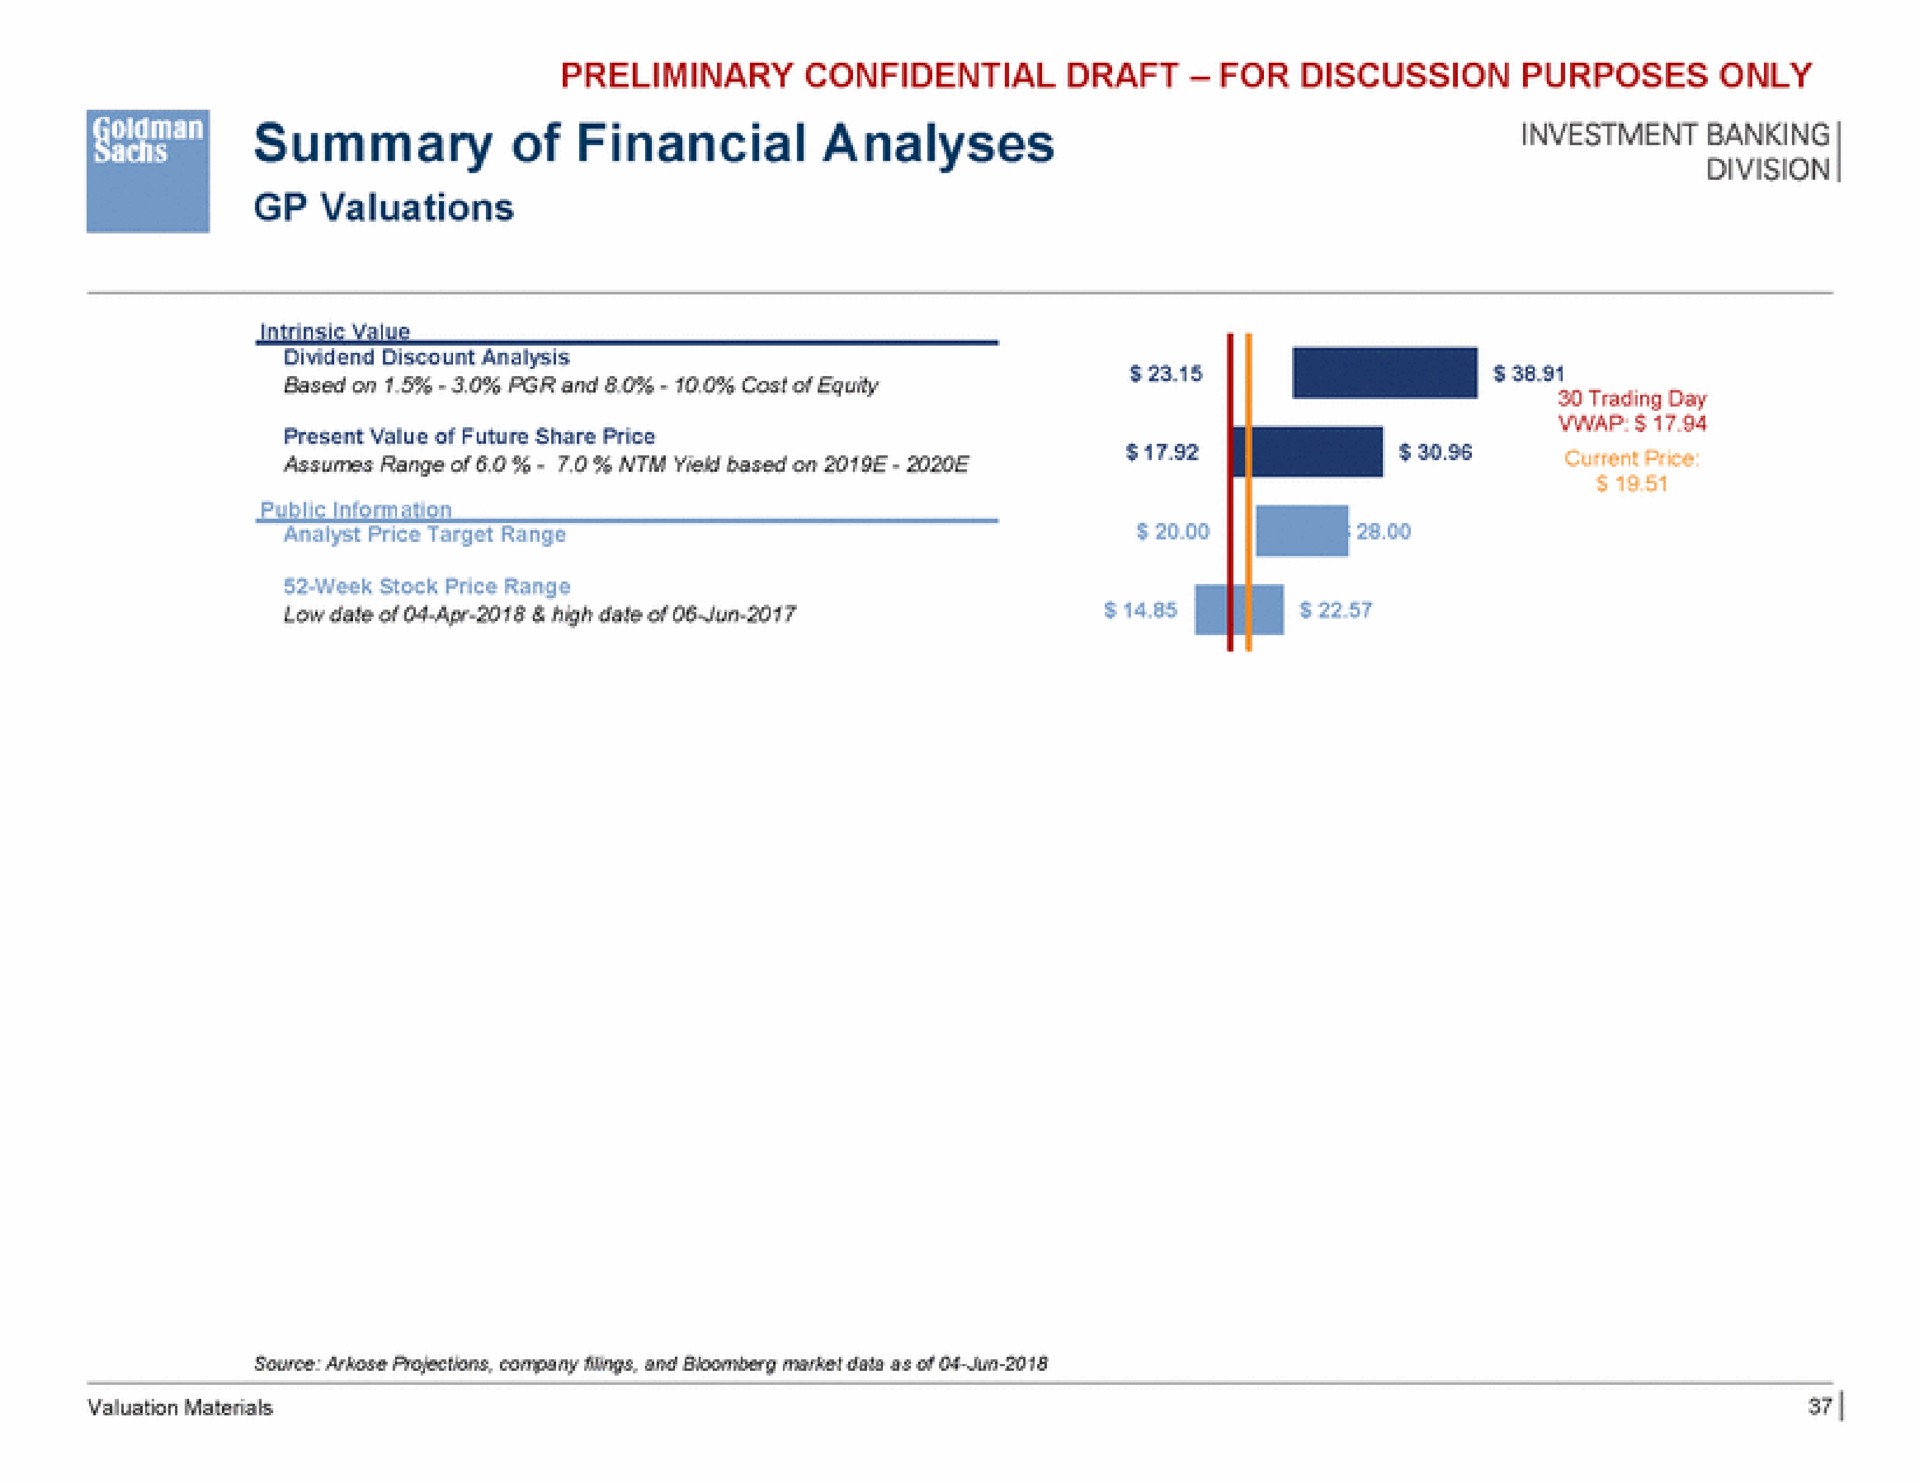 so a summary of financial analyses investment banking to tal | Goldman Sachs